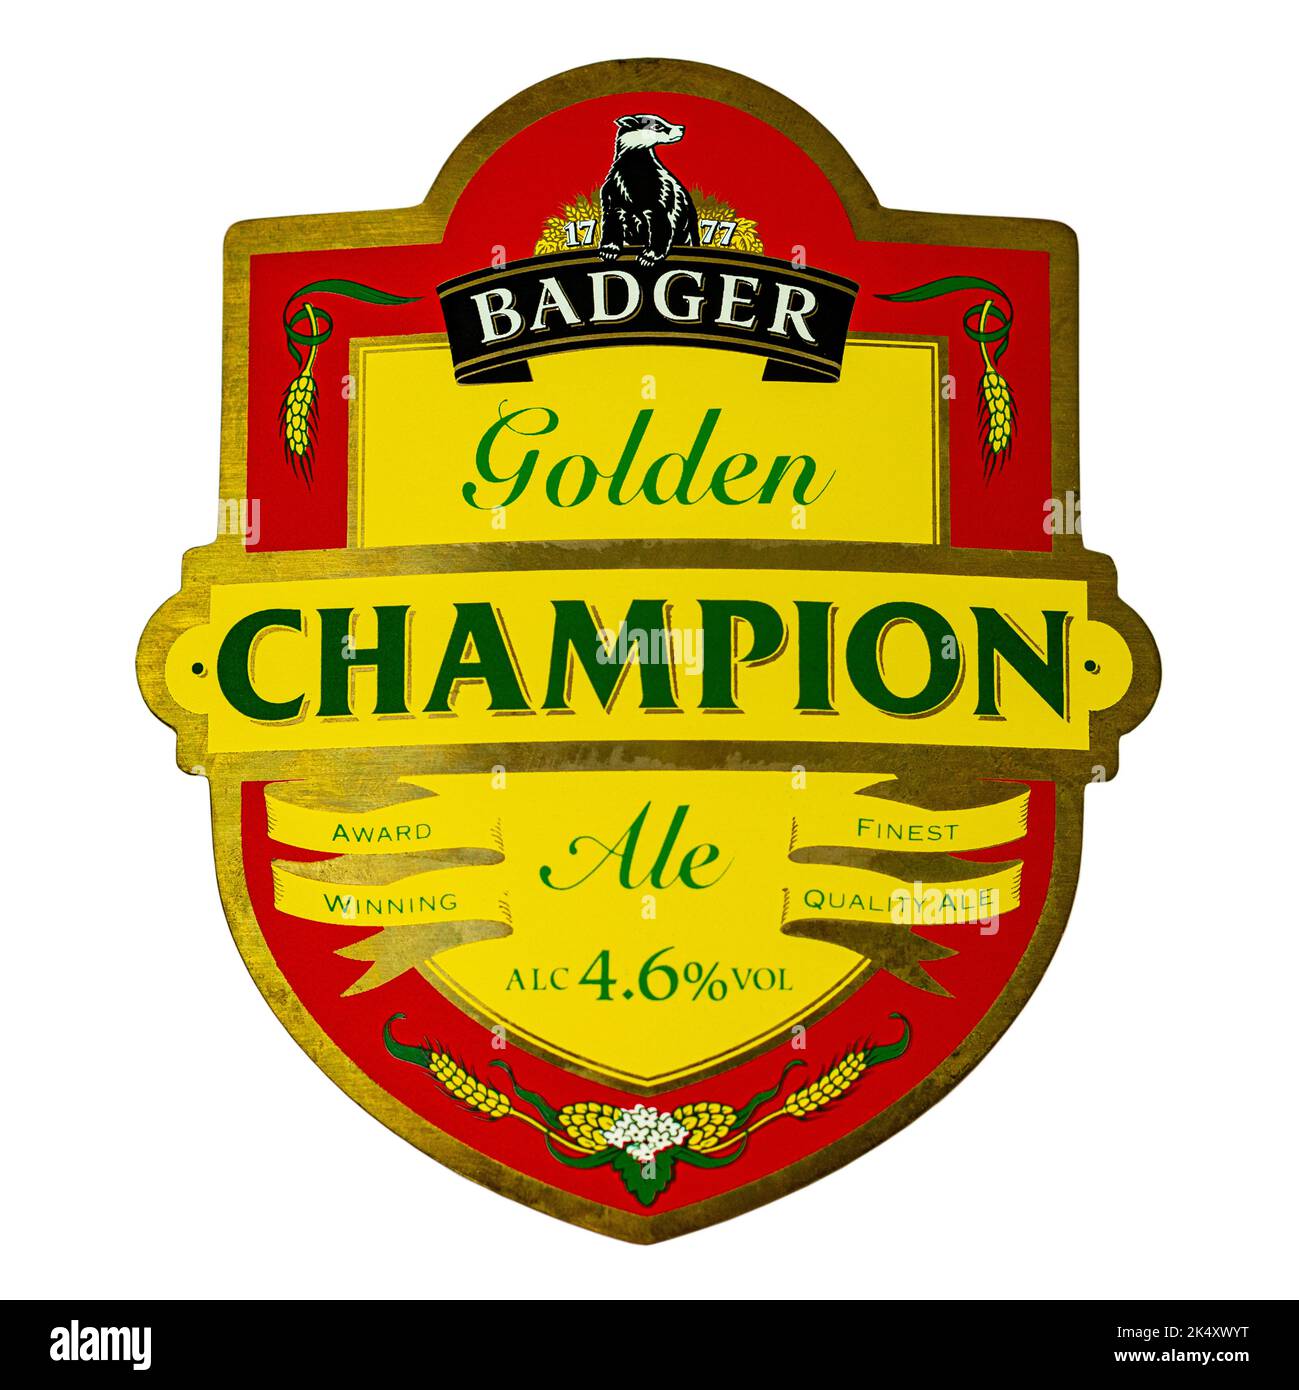 A pump clip for Badger (Hall & Woodhouse) Golden Champion draught ale. Stock Photo